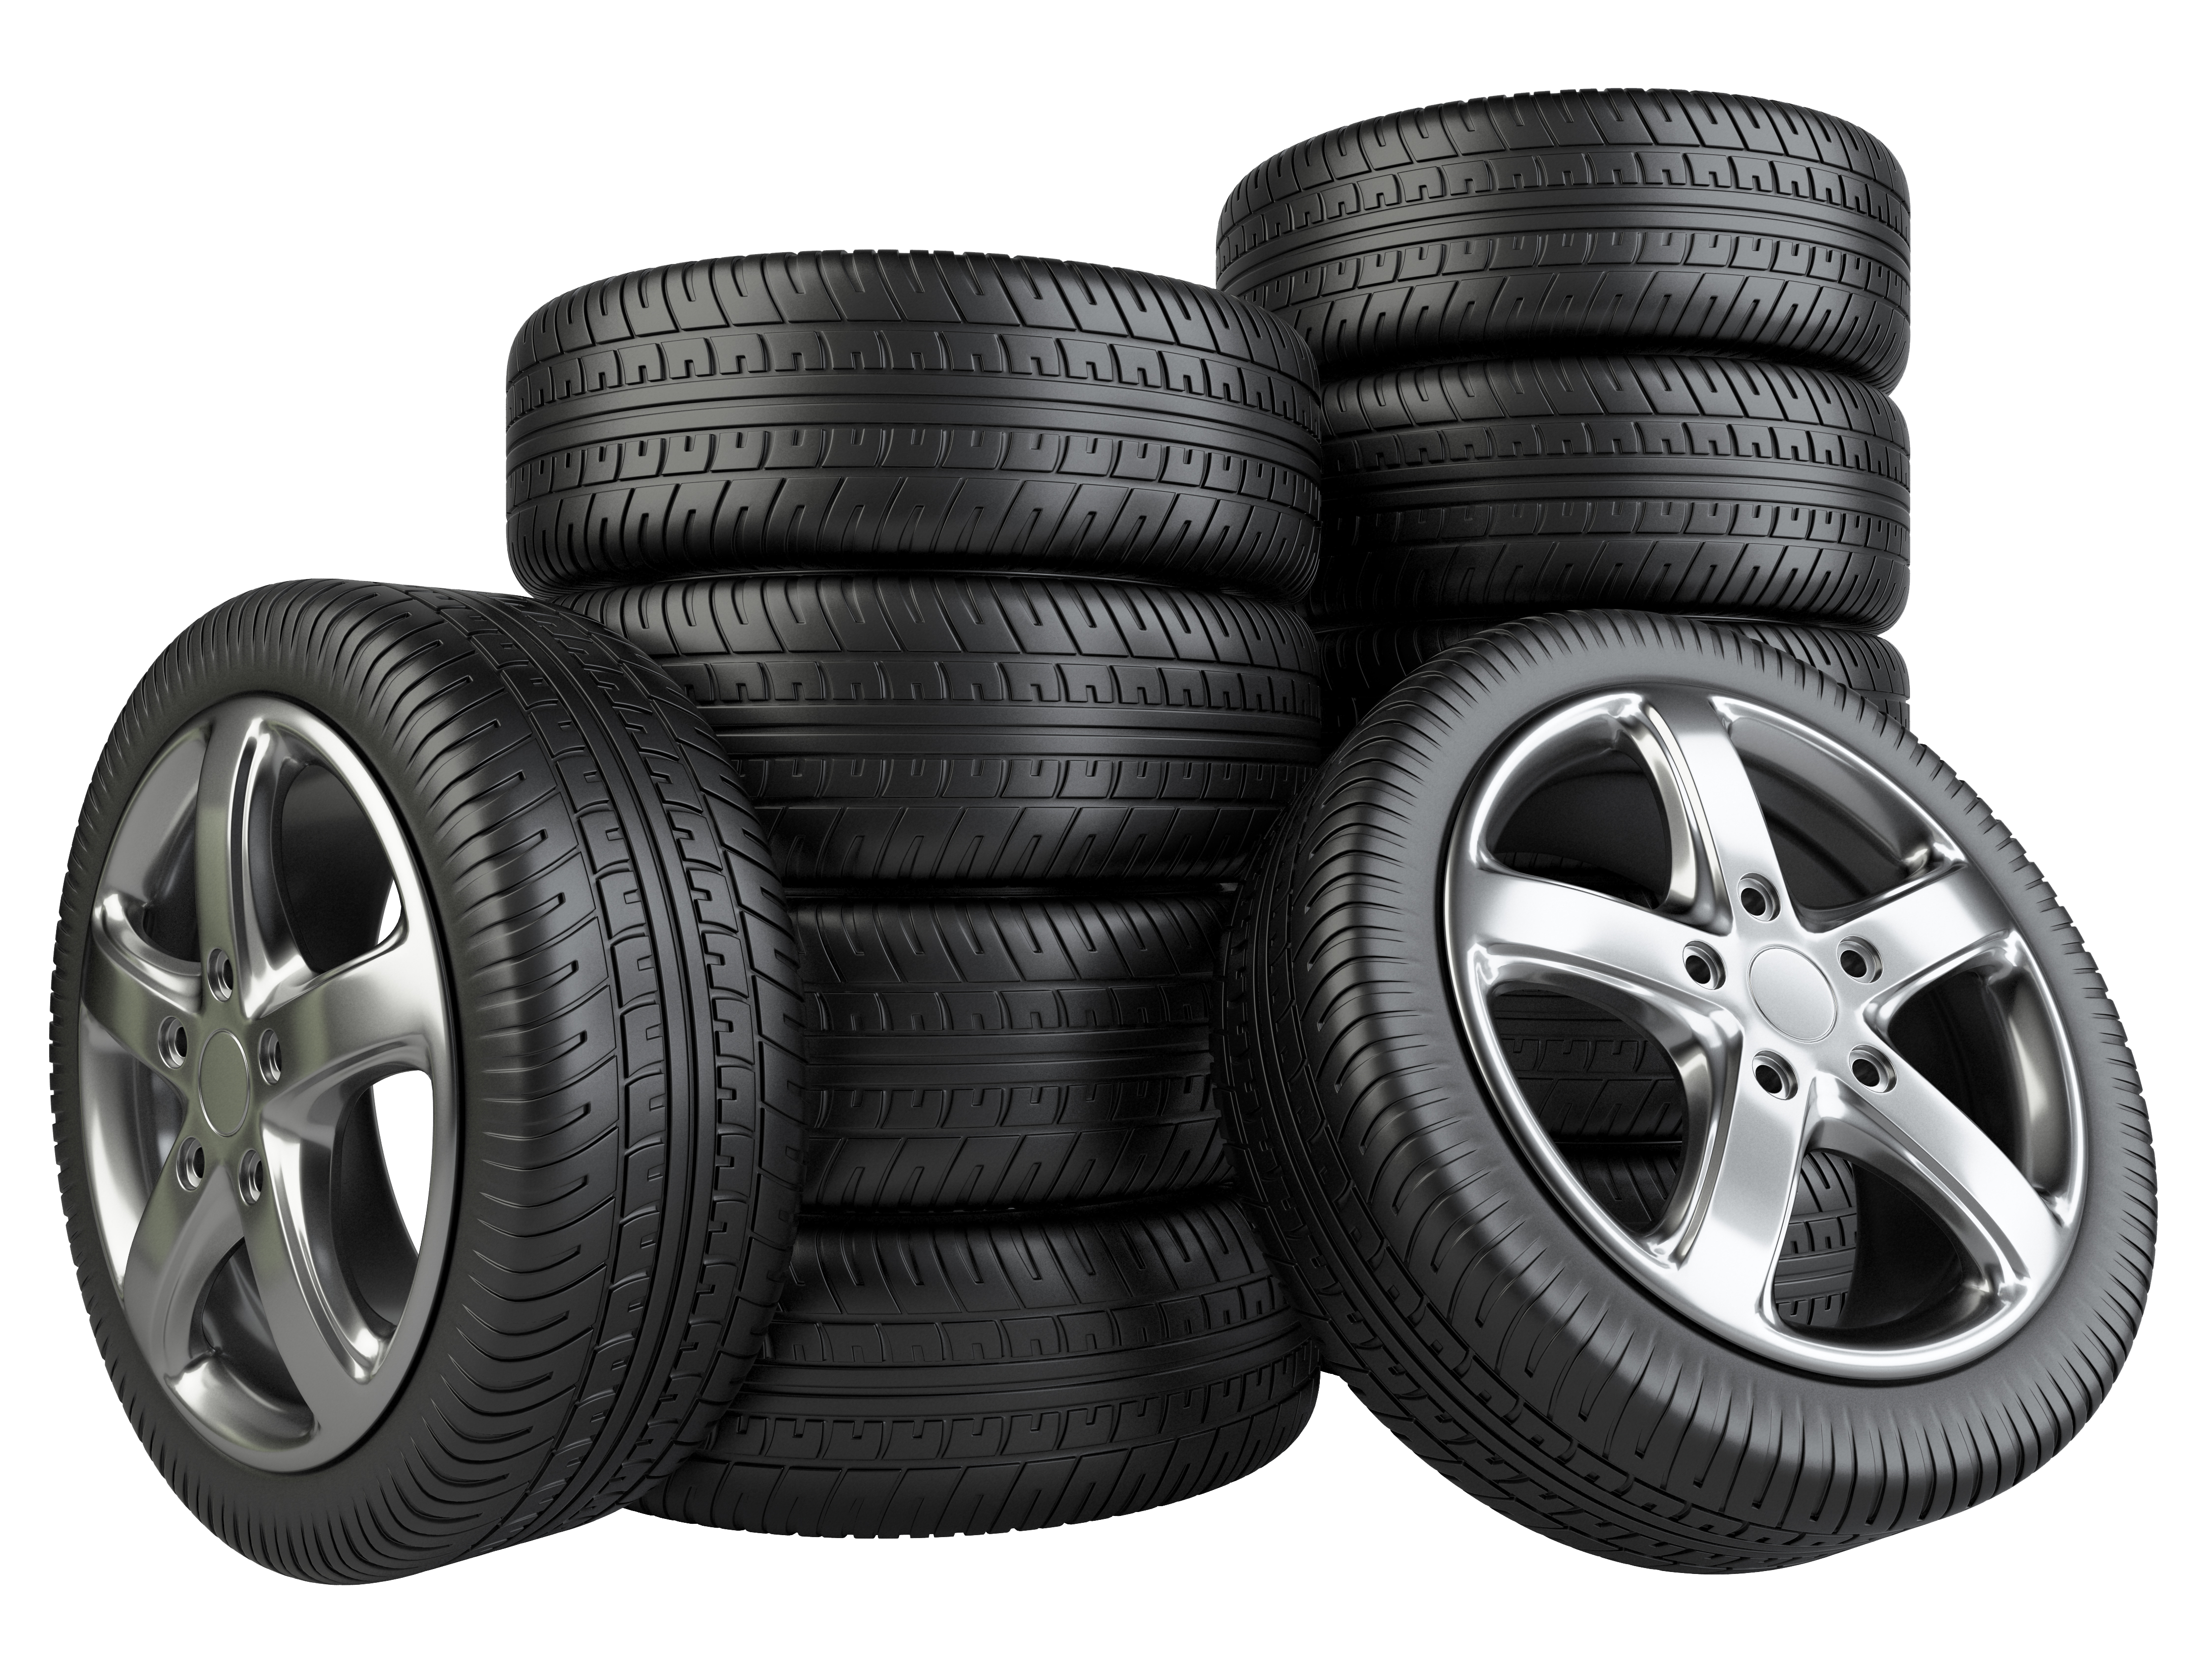 Wheel Car Tires Rubber Tire Free Download Image Clipart